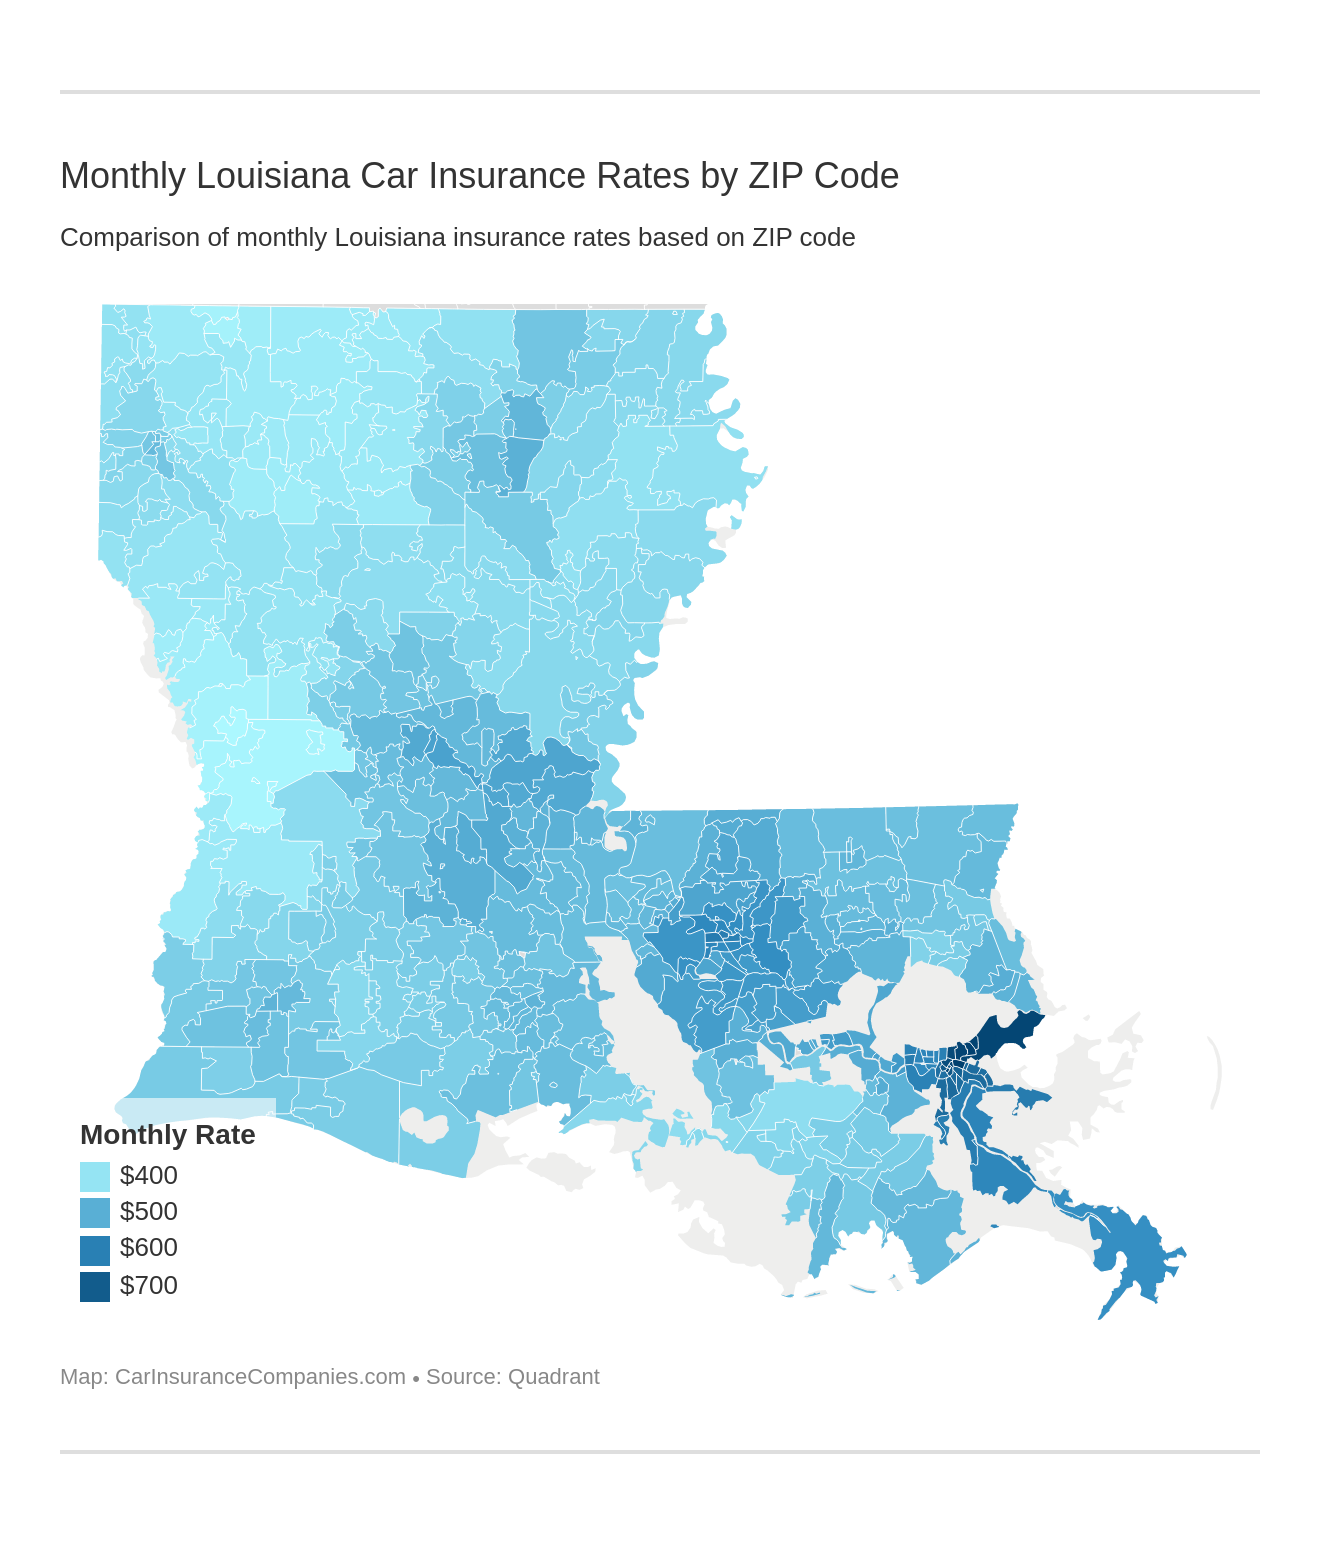 Monthly Louisiana Car Insurance Rates by ZIP Code